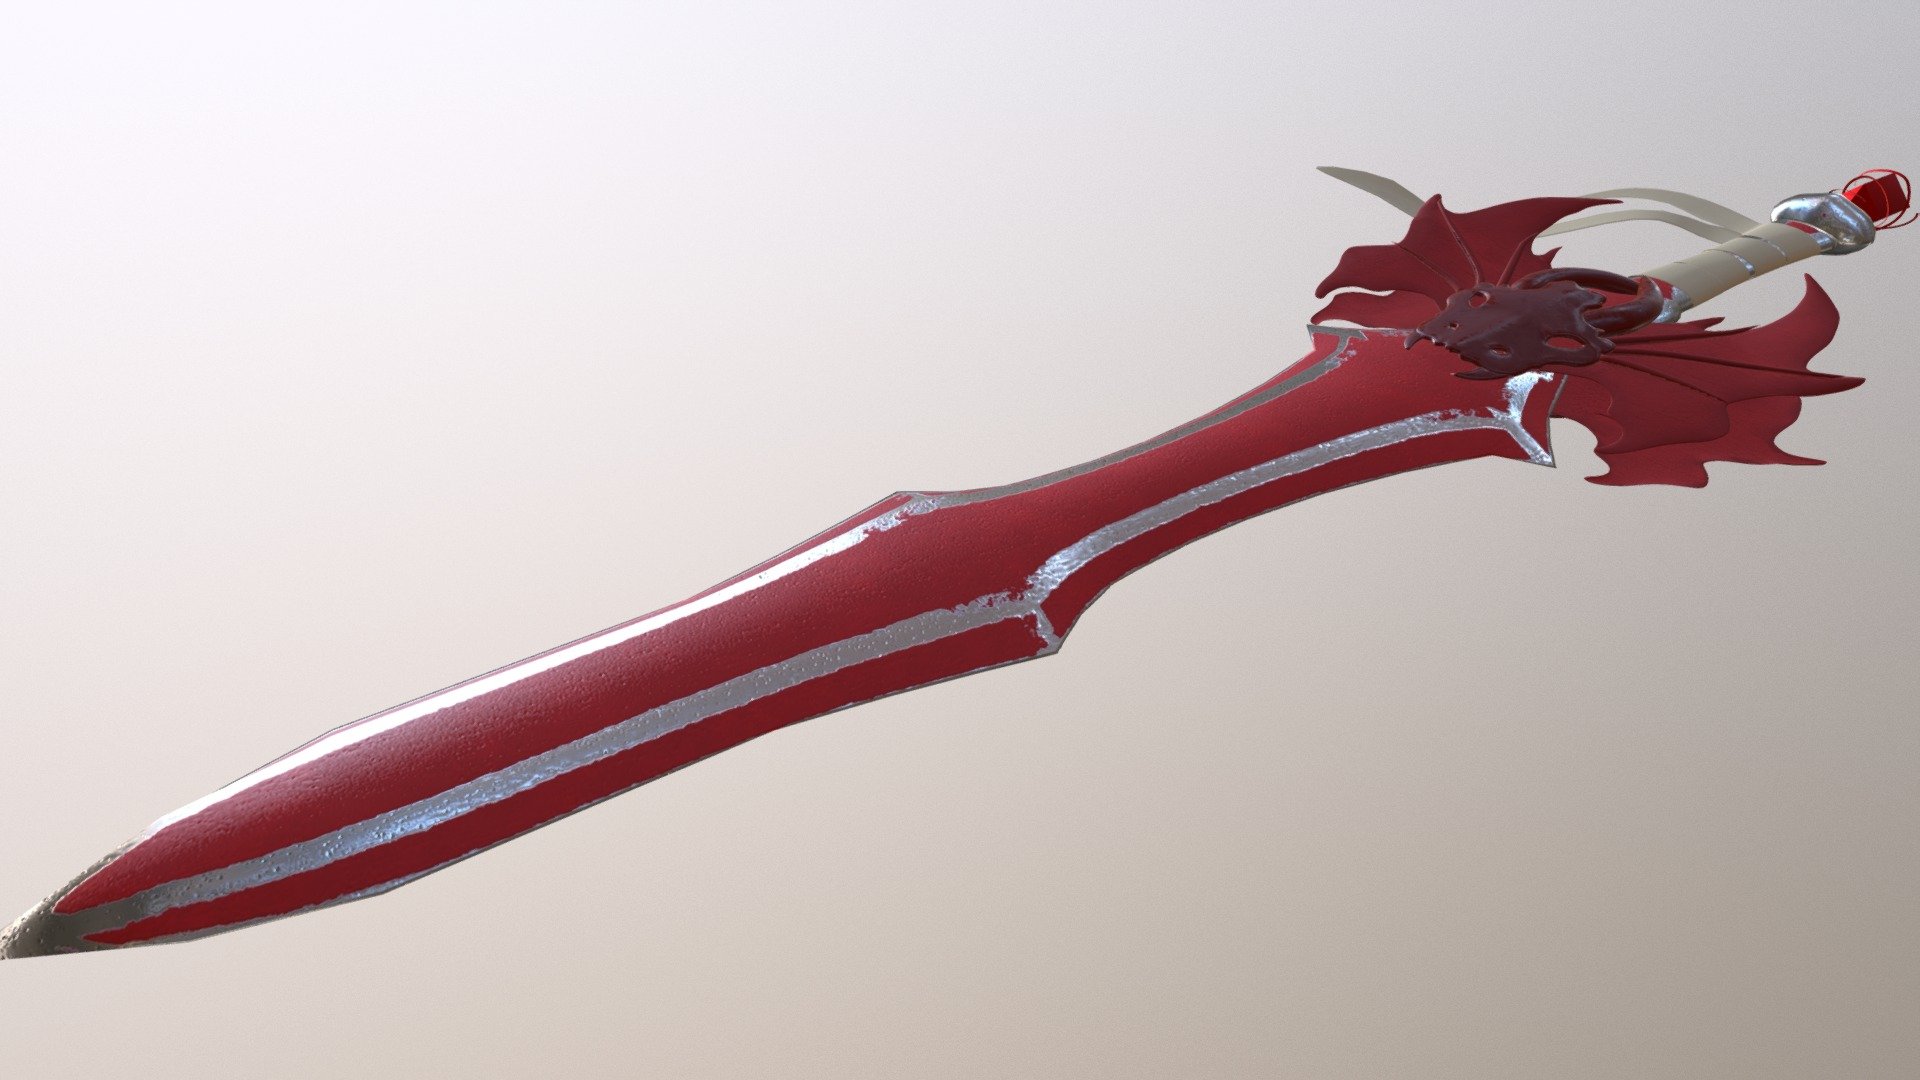 The Dragon Hunter's Red Sword